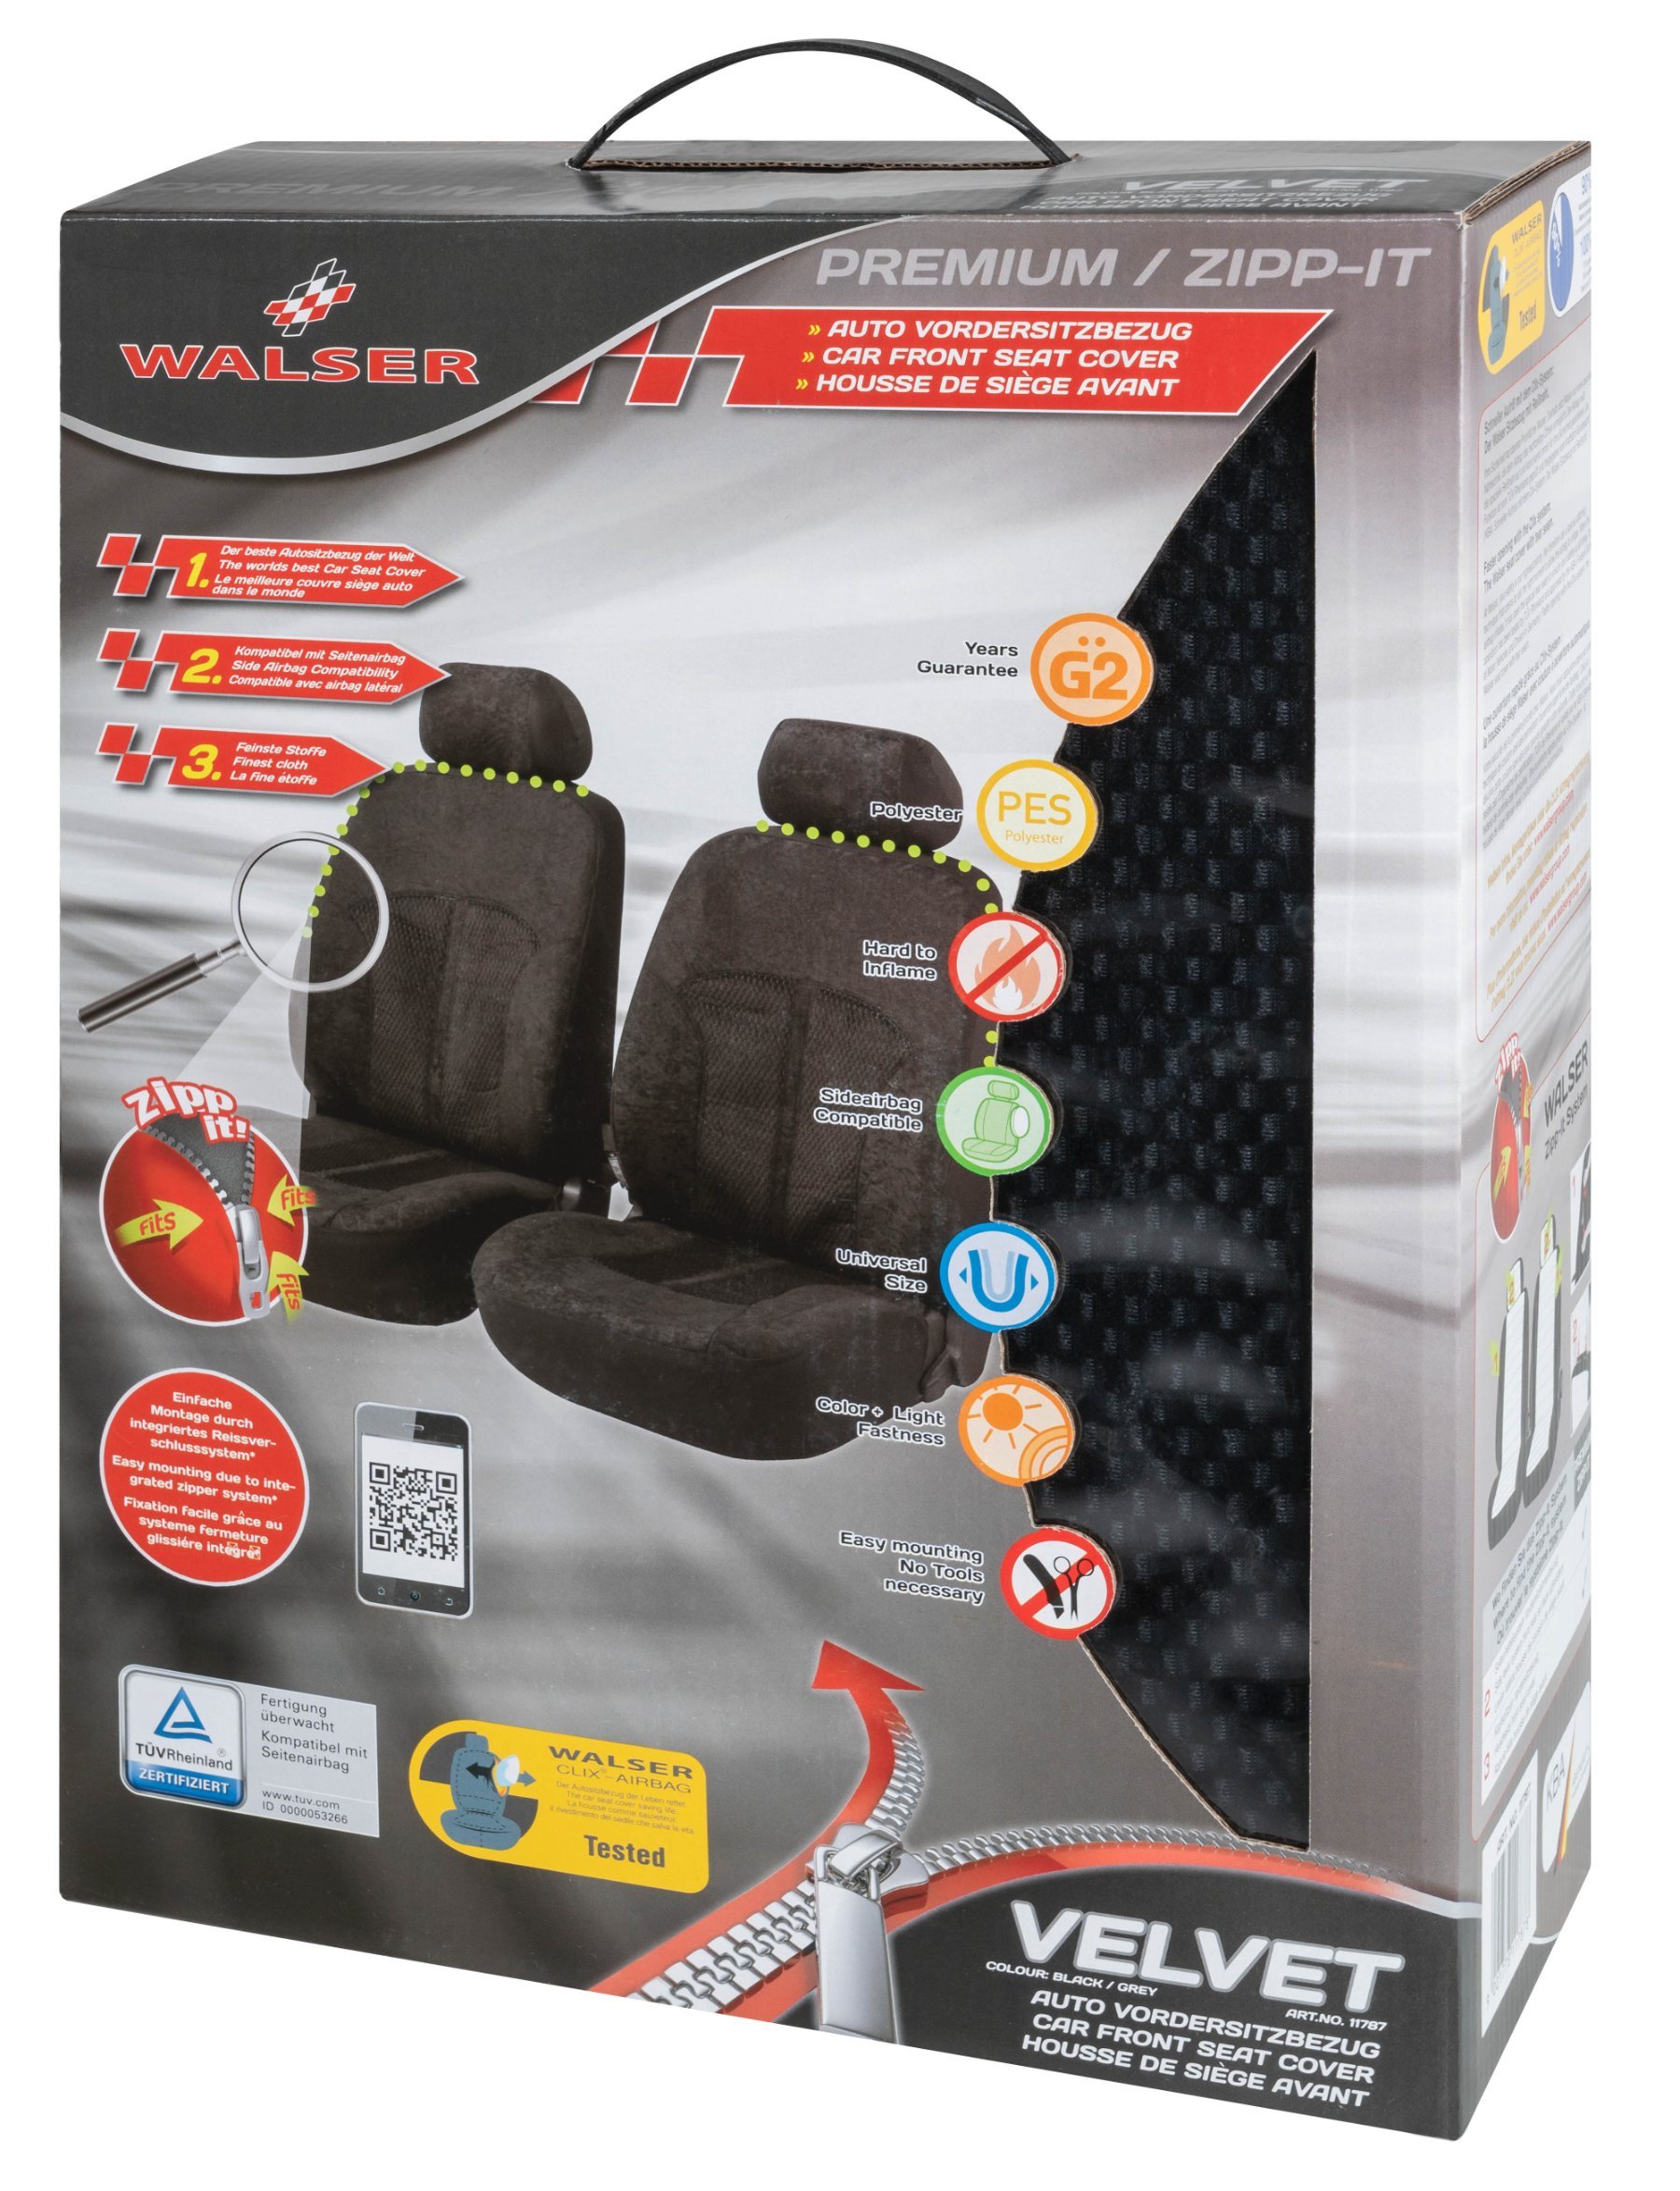 ZIPP IT Premium Velvet Car Seat covers for two front seats with zipper system